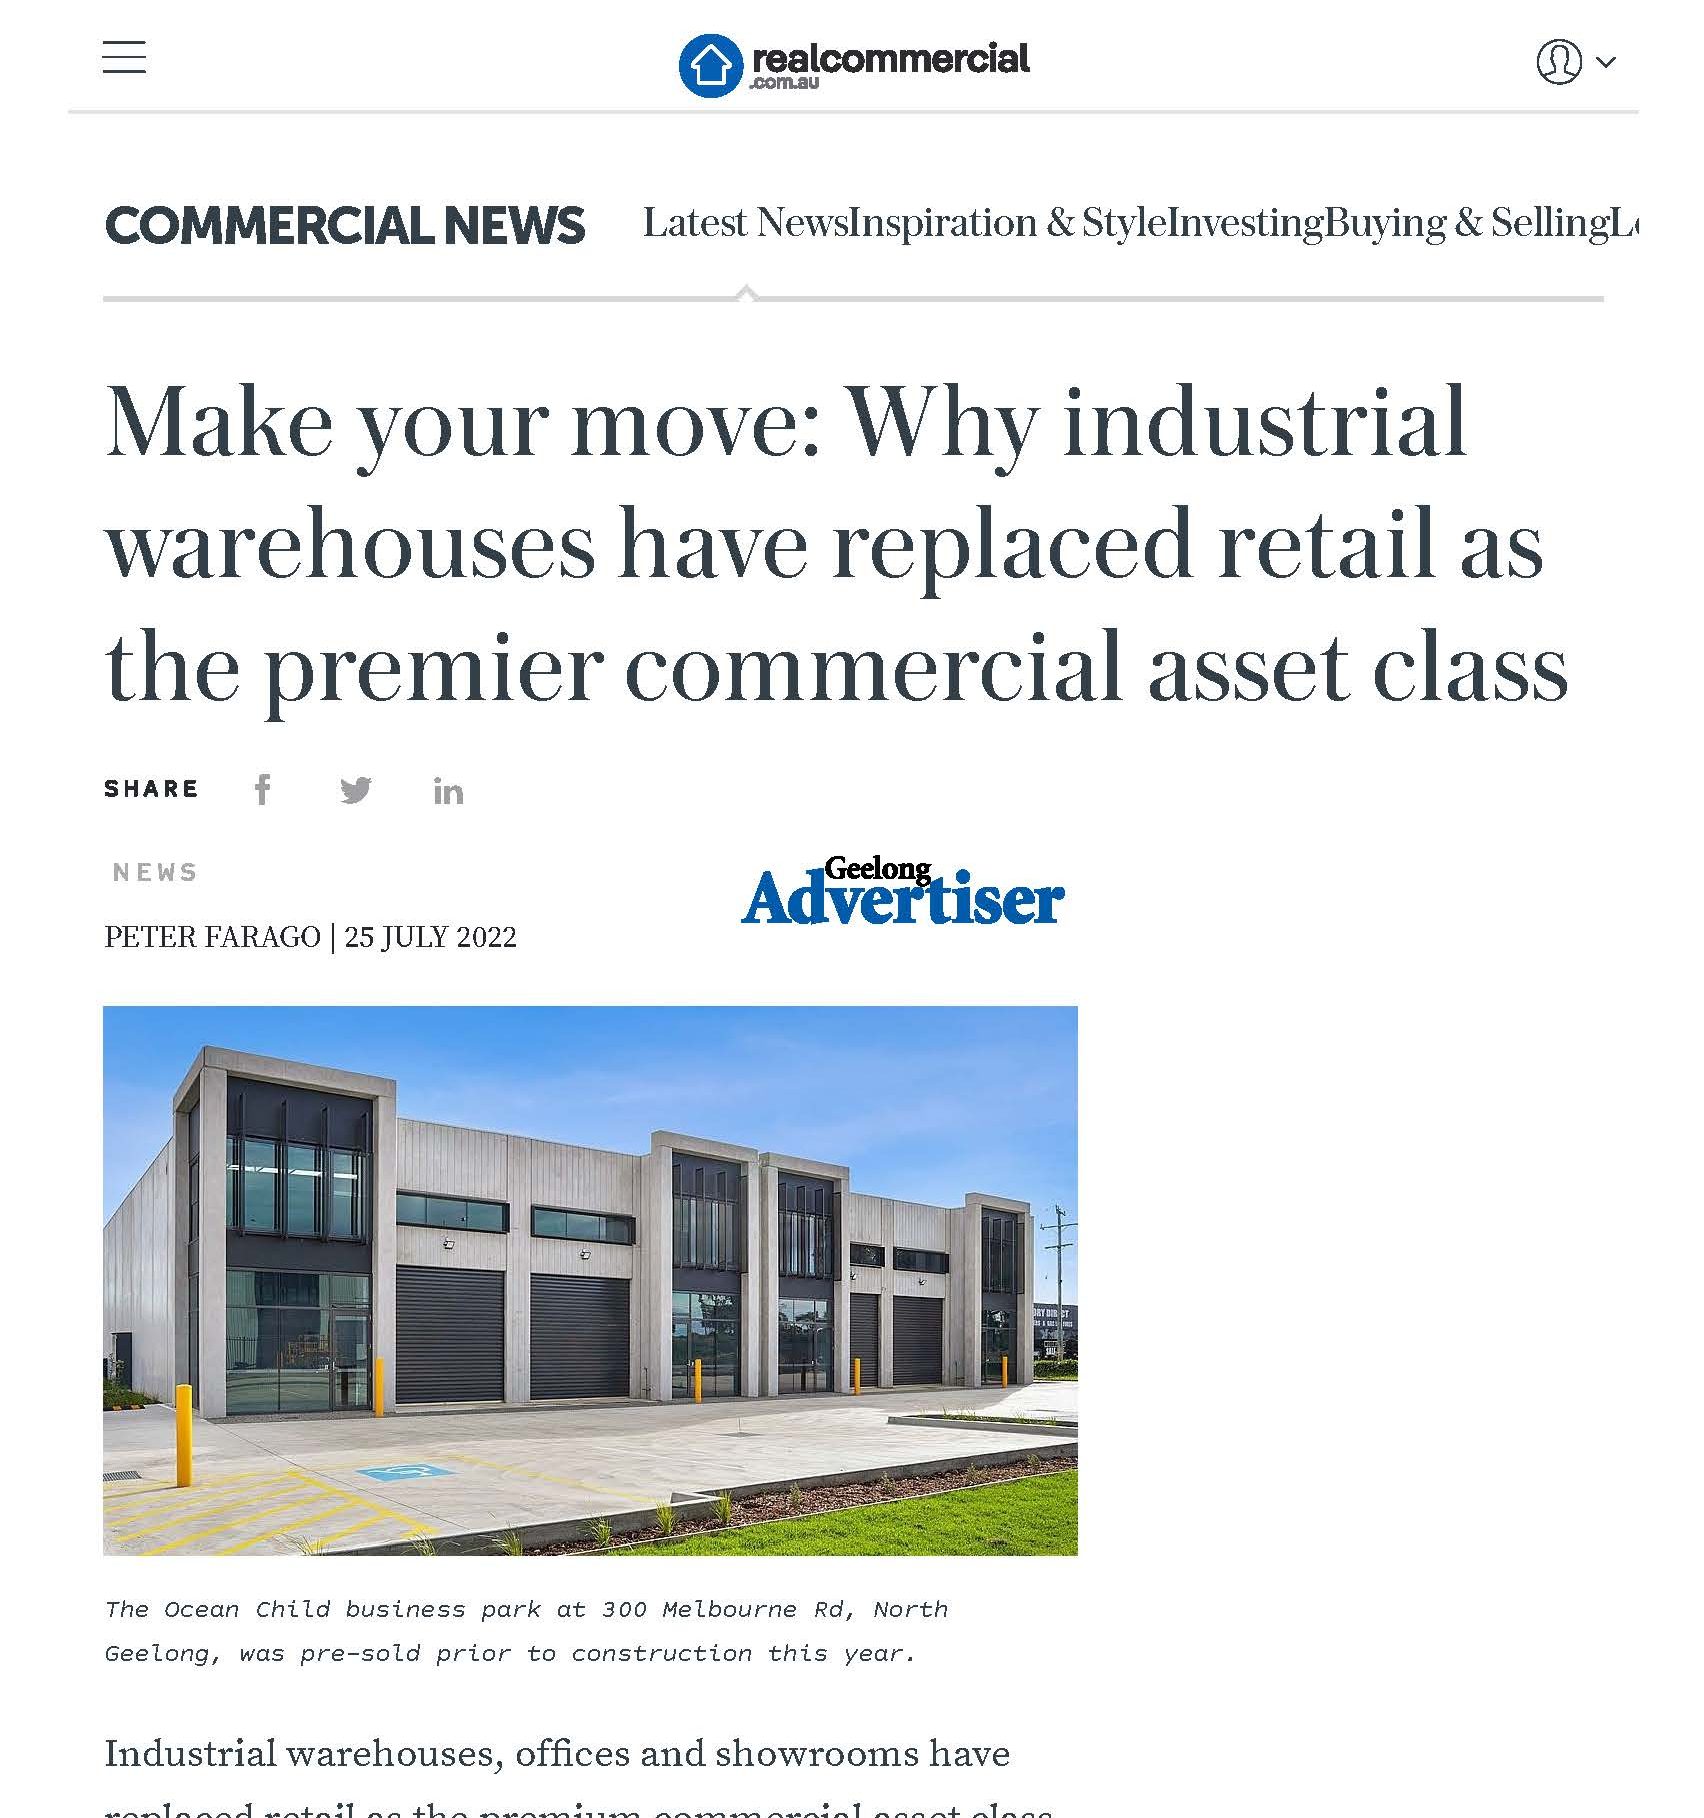 Make your move: Why industrial warehouses have replaced retail as the premier commercial asset class